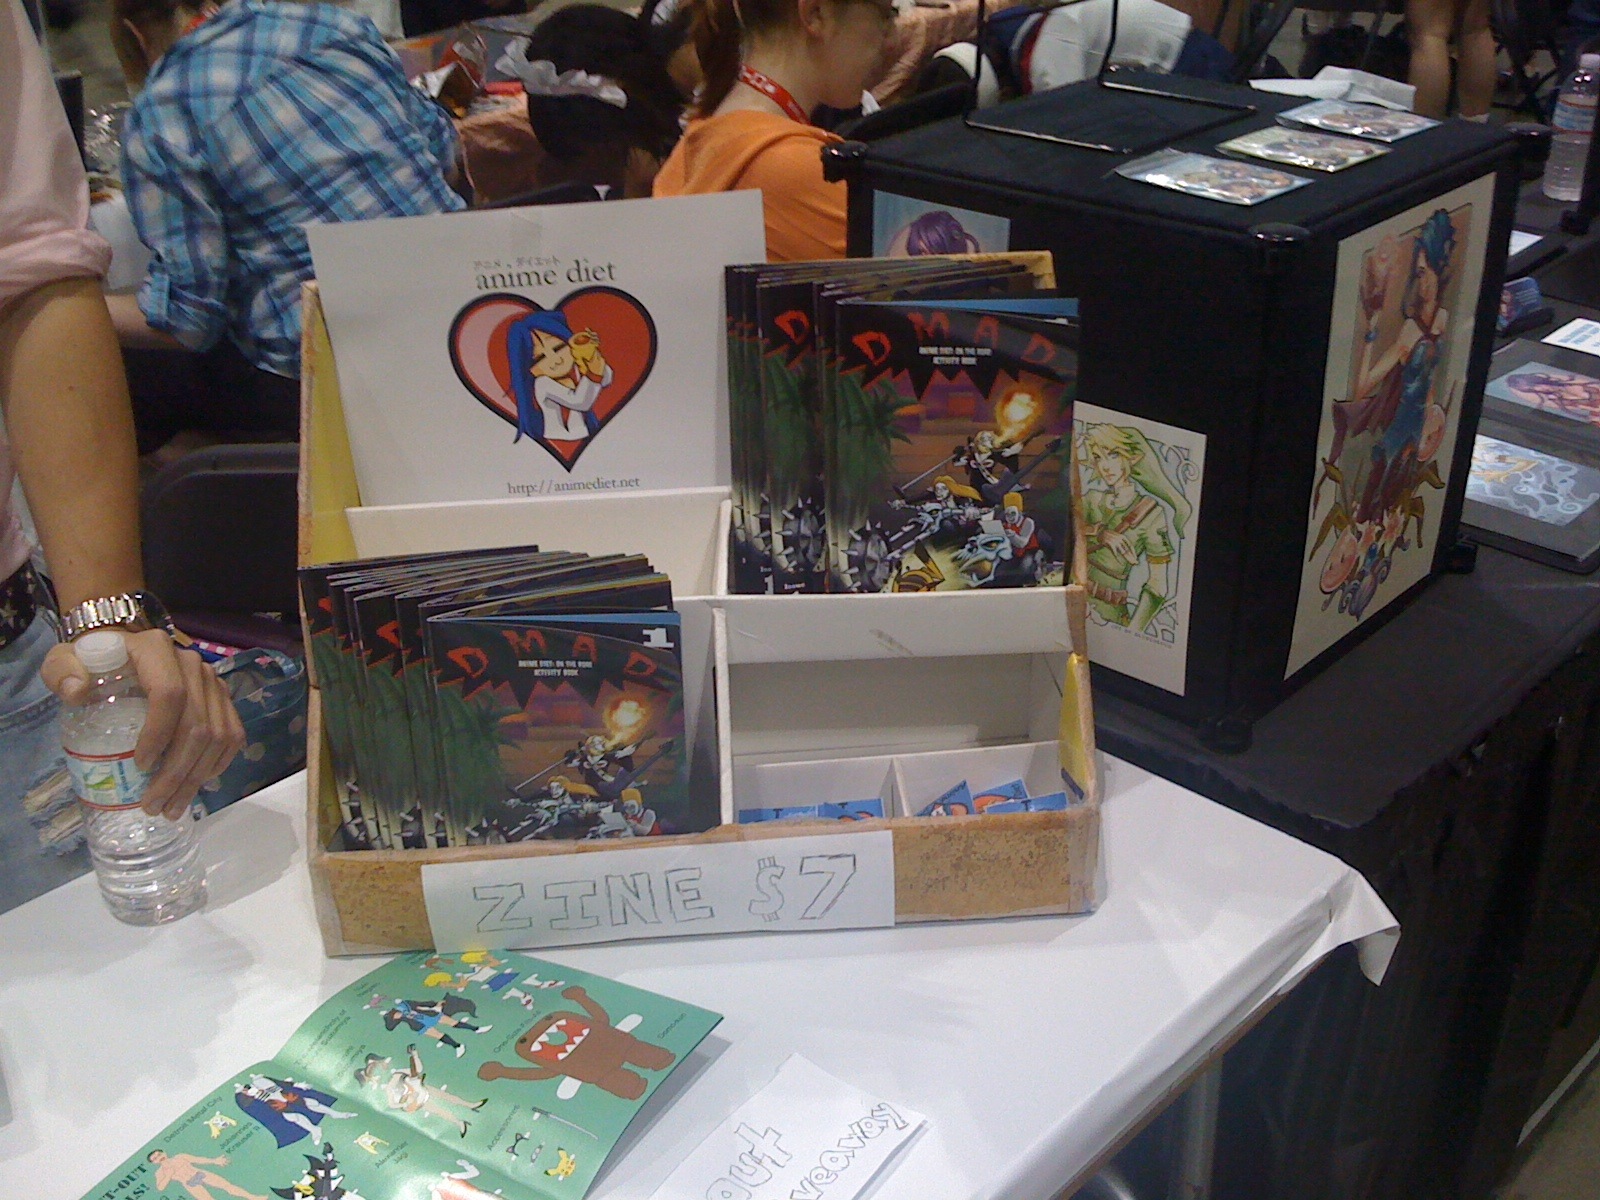 Our table and zine at Artists' Alley